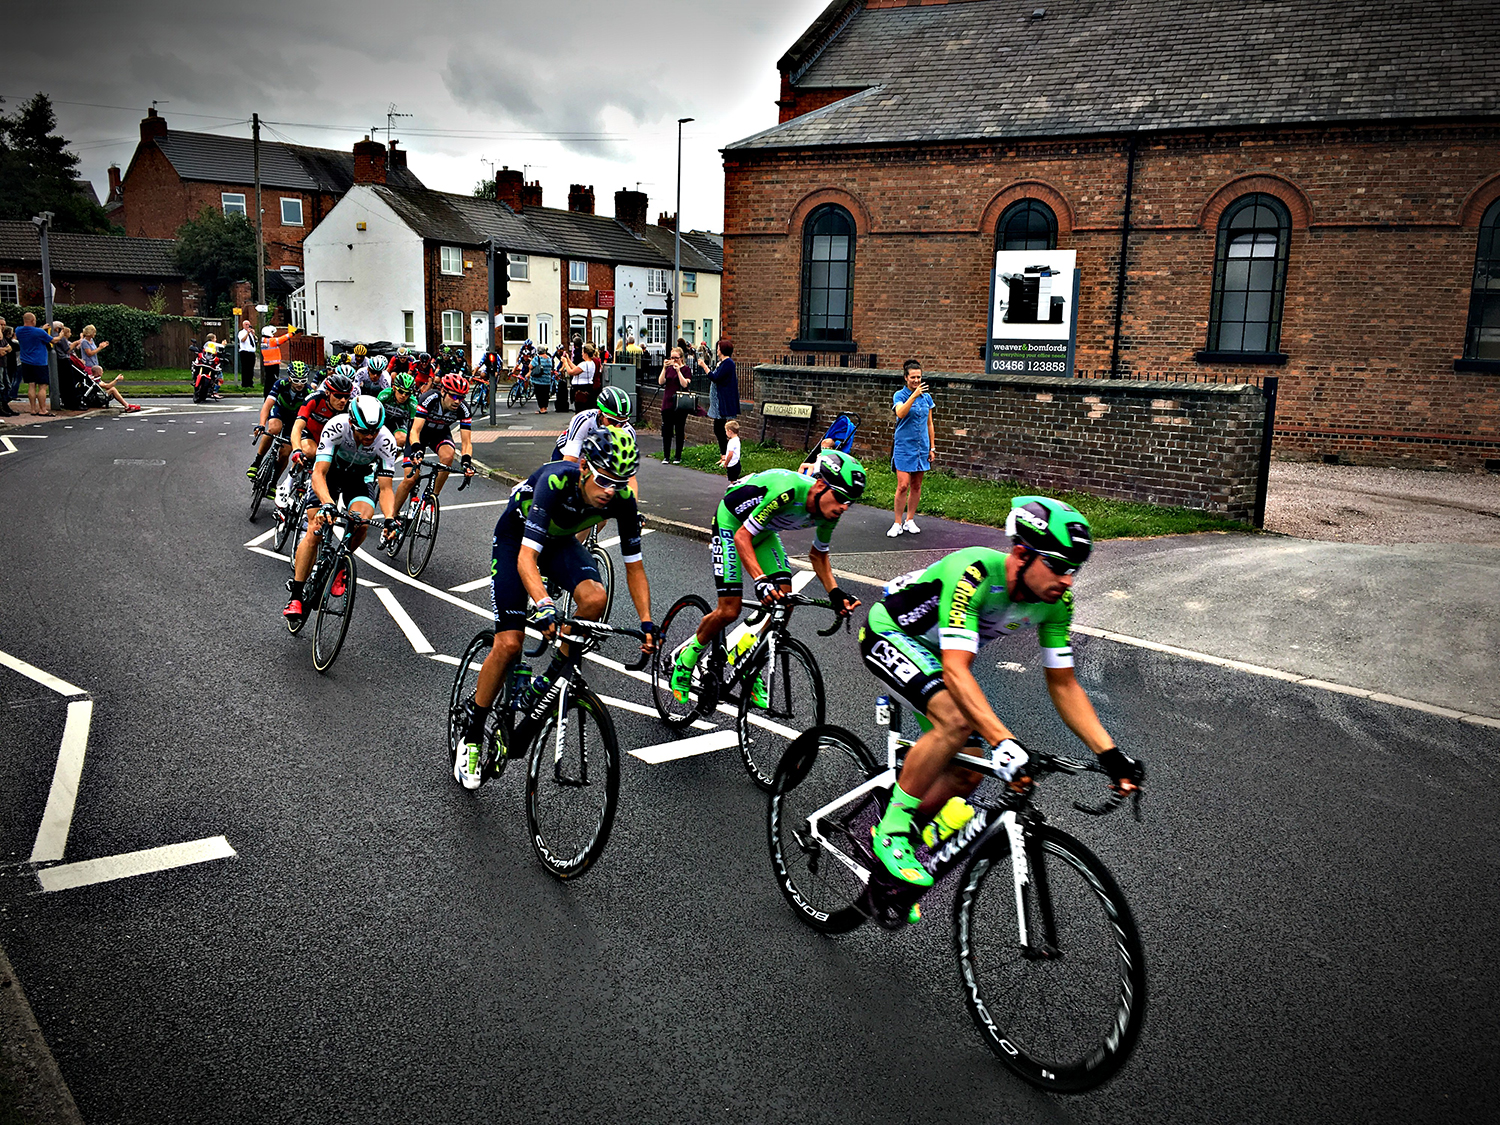 Tour of Britain Middlewich, Cheshire